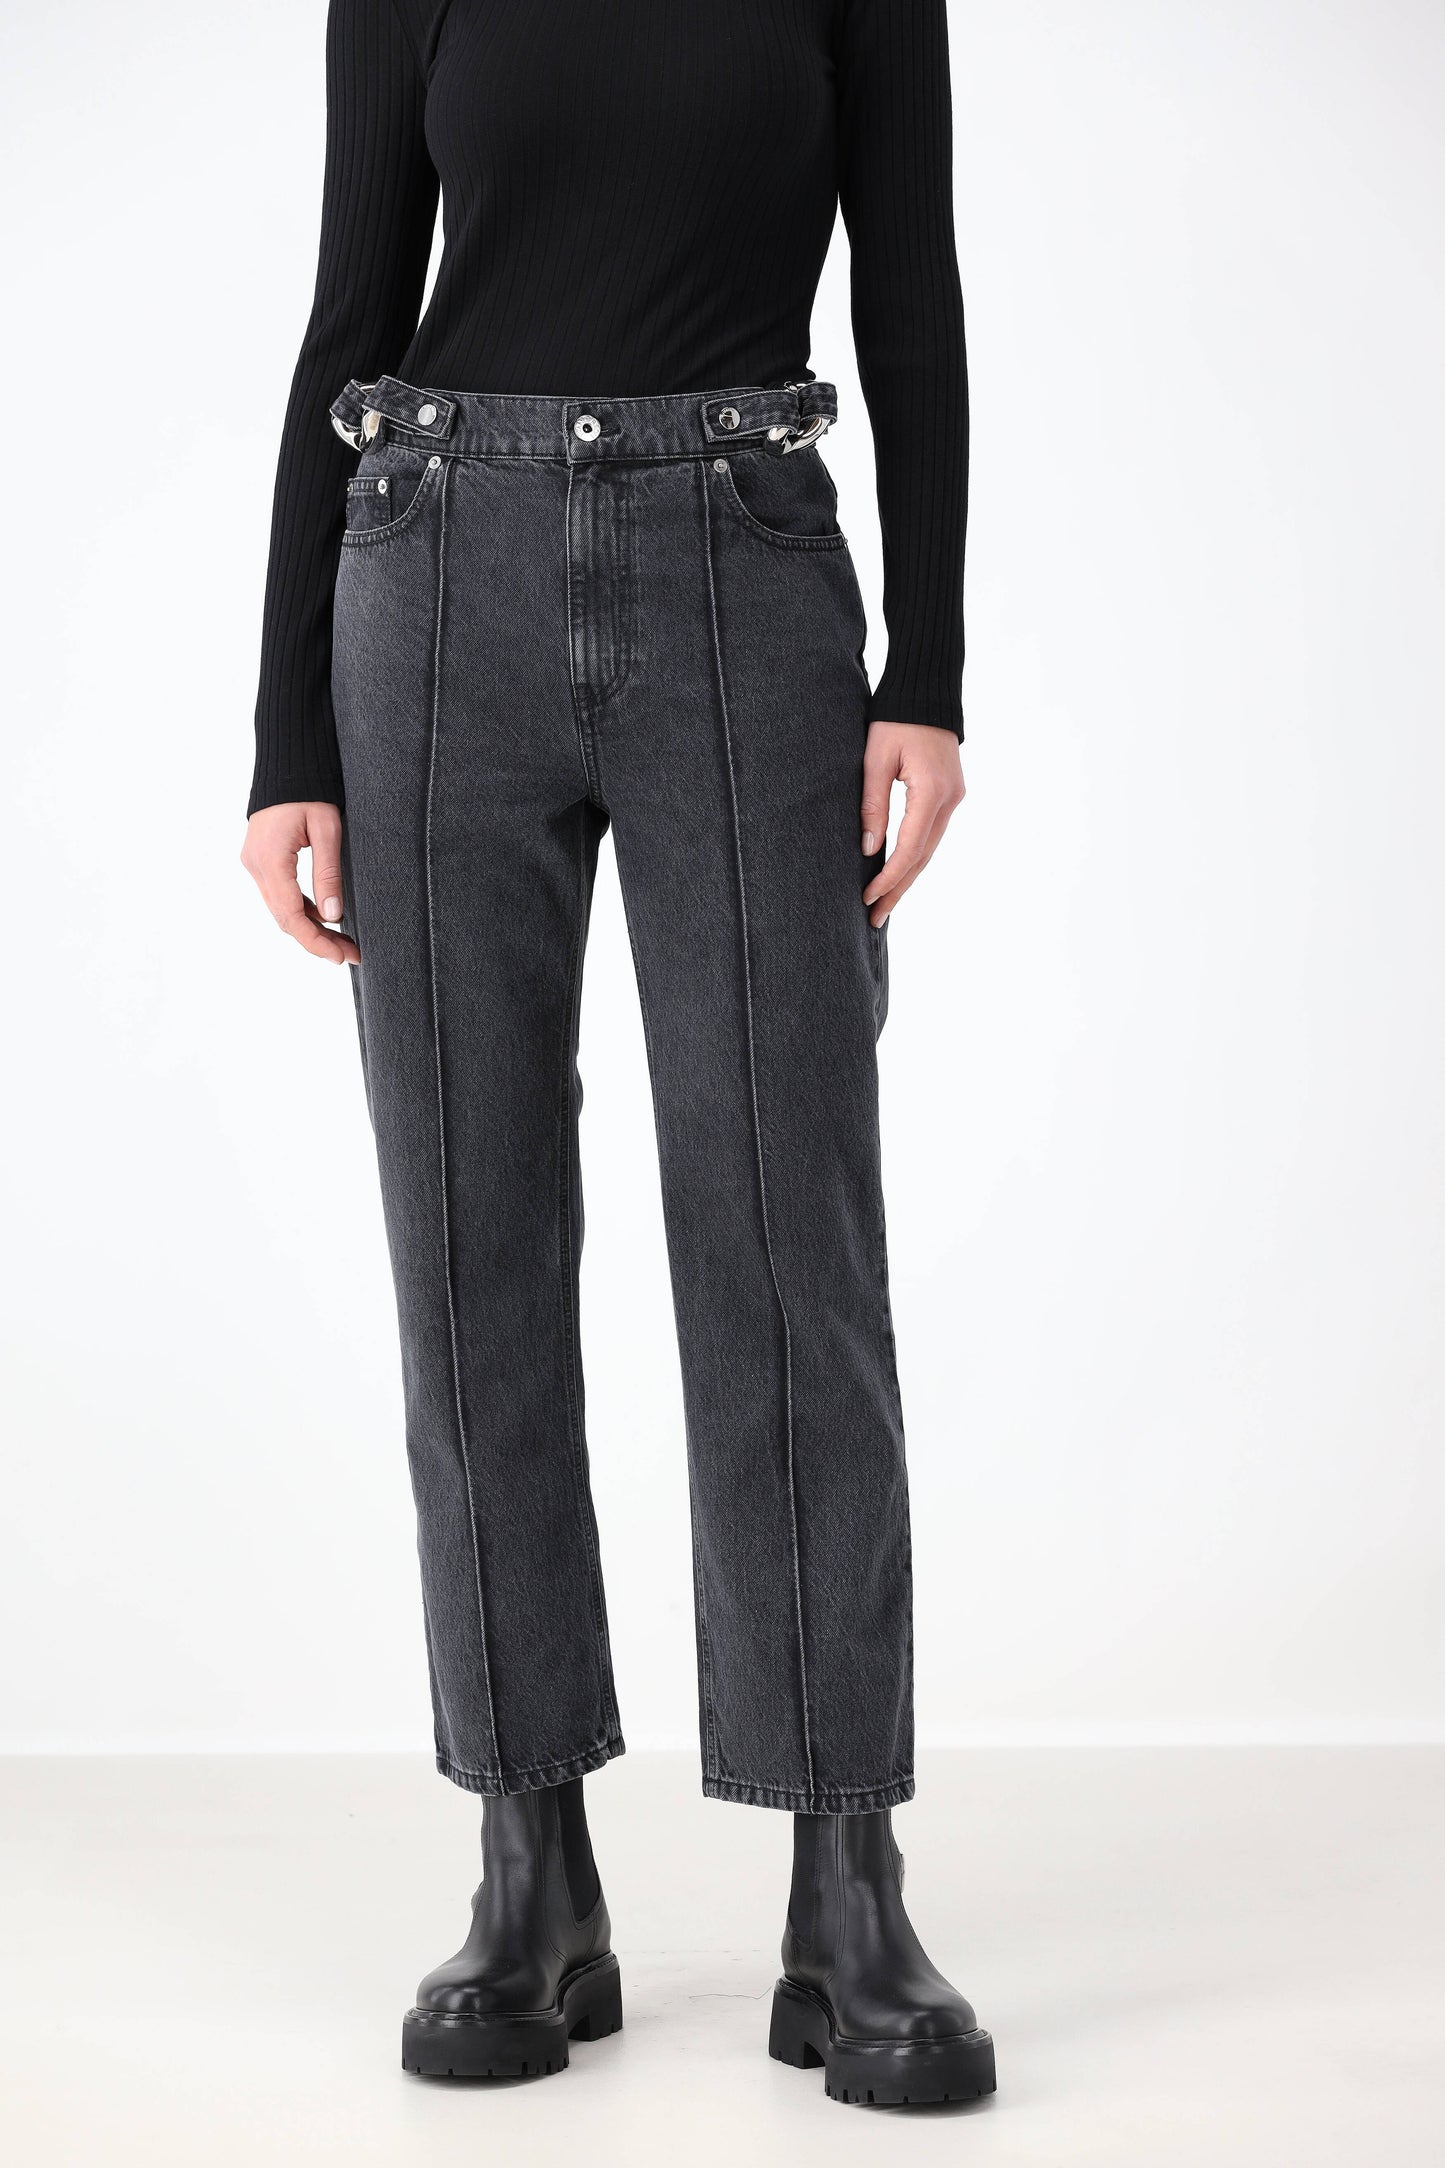 Jeans Chain Link in SchwarzJW Anderson - Anita Hass